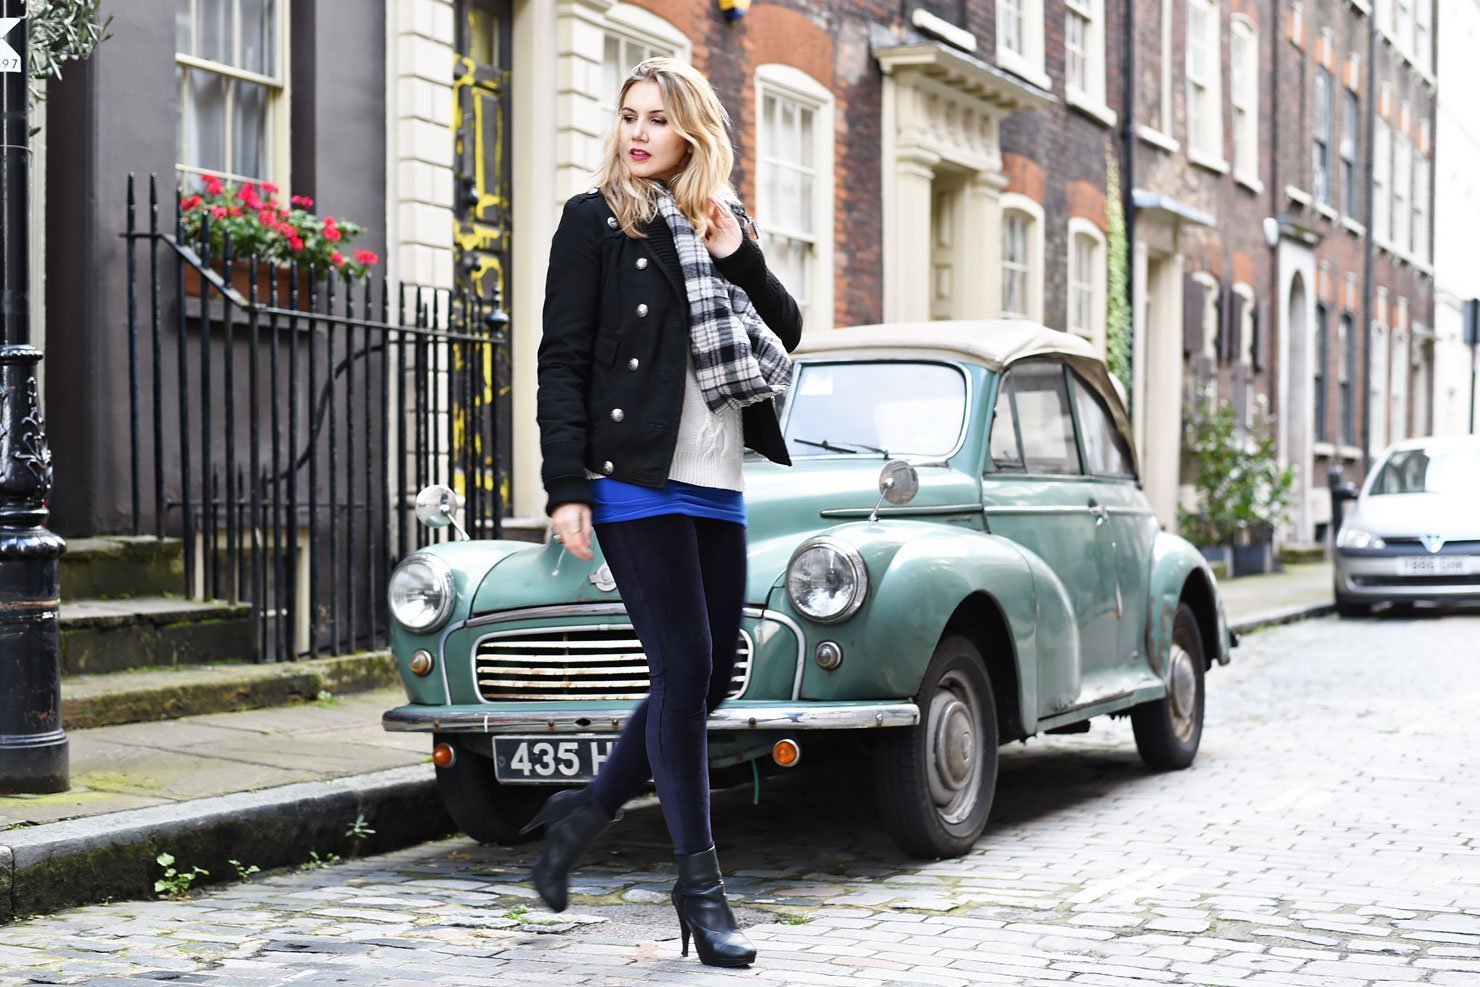 A vintage car and cobblestones as the perfect decor for a fashion shoot with Chiara of Ma Che Davvero in Shoreditch